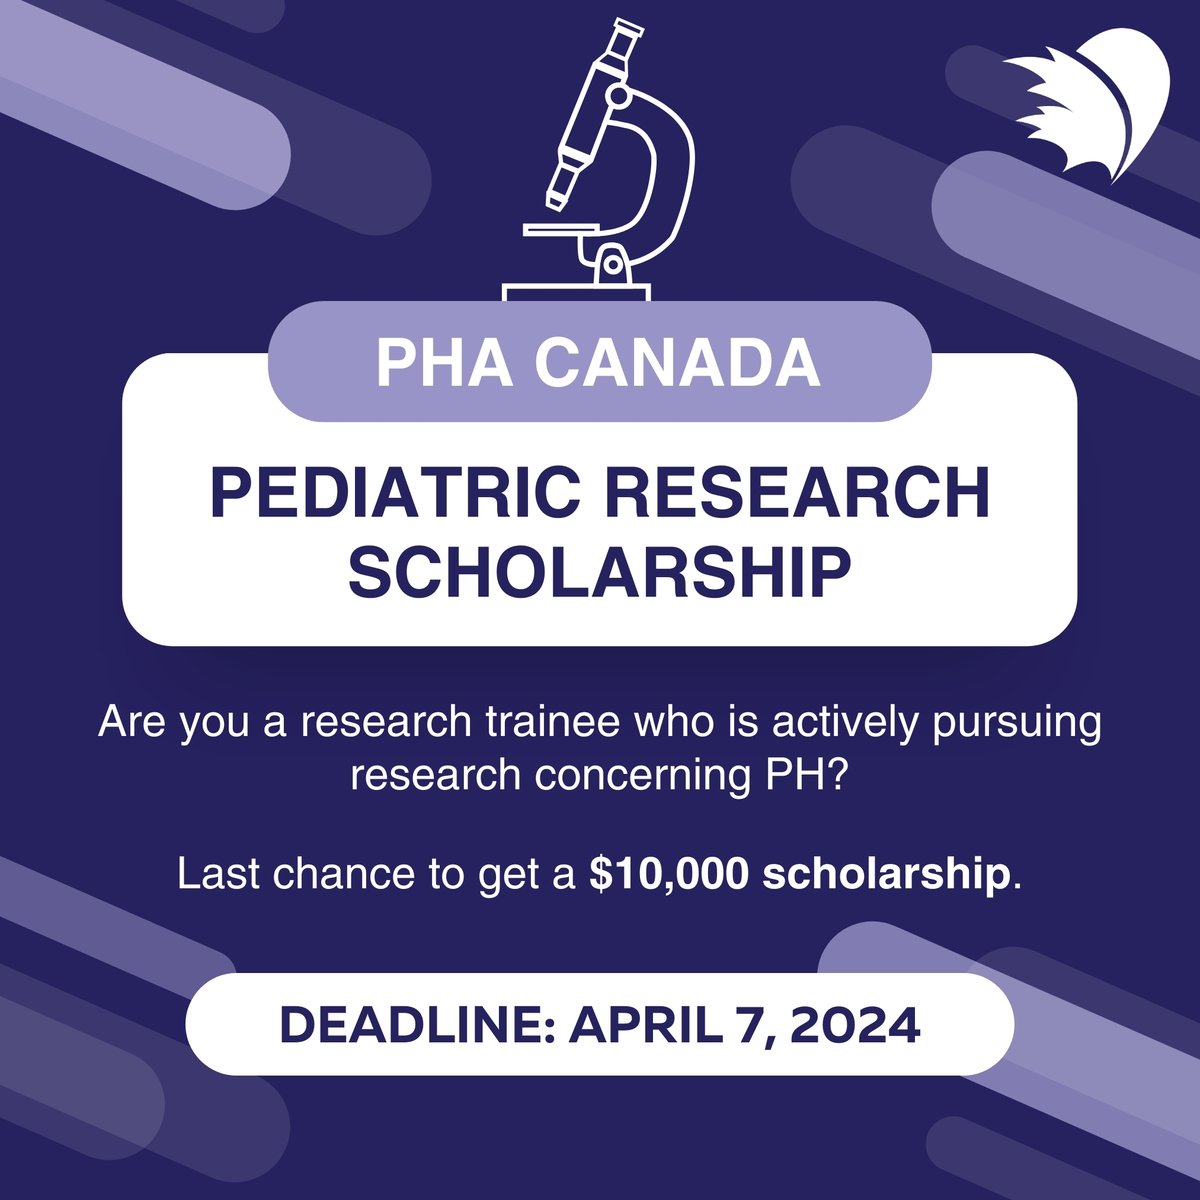 🔬 Attention all research trainees working on pediatric #PHResearch! The deadline to apply for the Bell Family #PediatricPH #ResearchScholarship is fast approaching - April 7th! Access the application form and learn more at: ow.ly/GeSs50R6U89